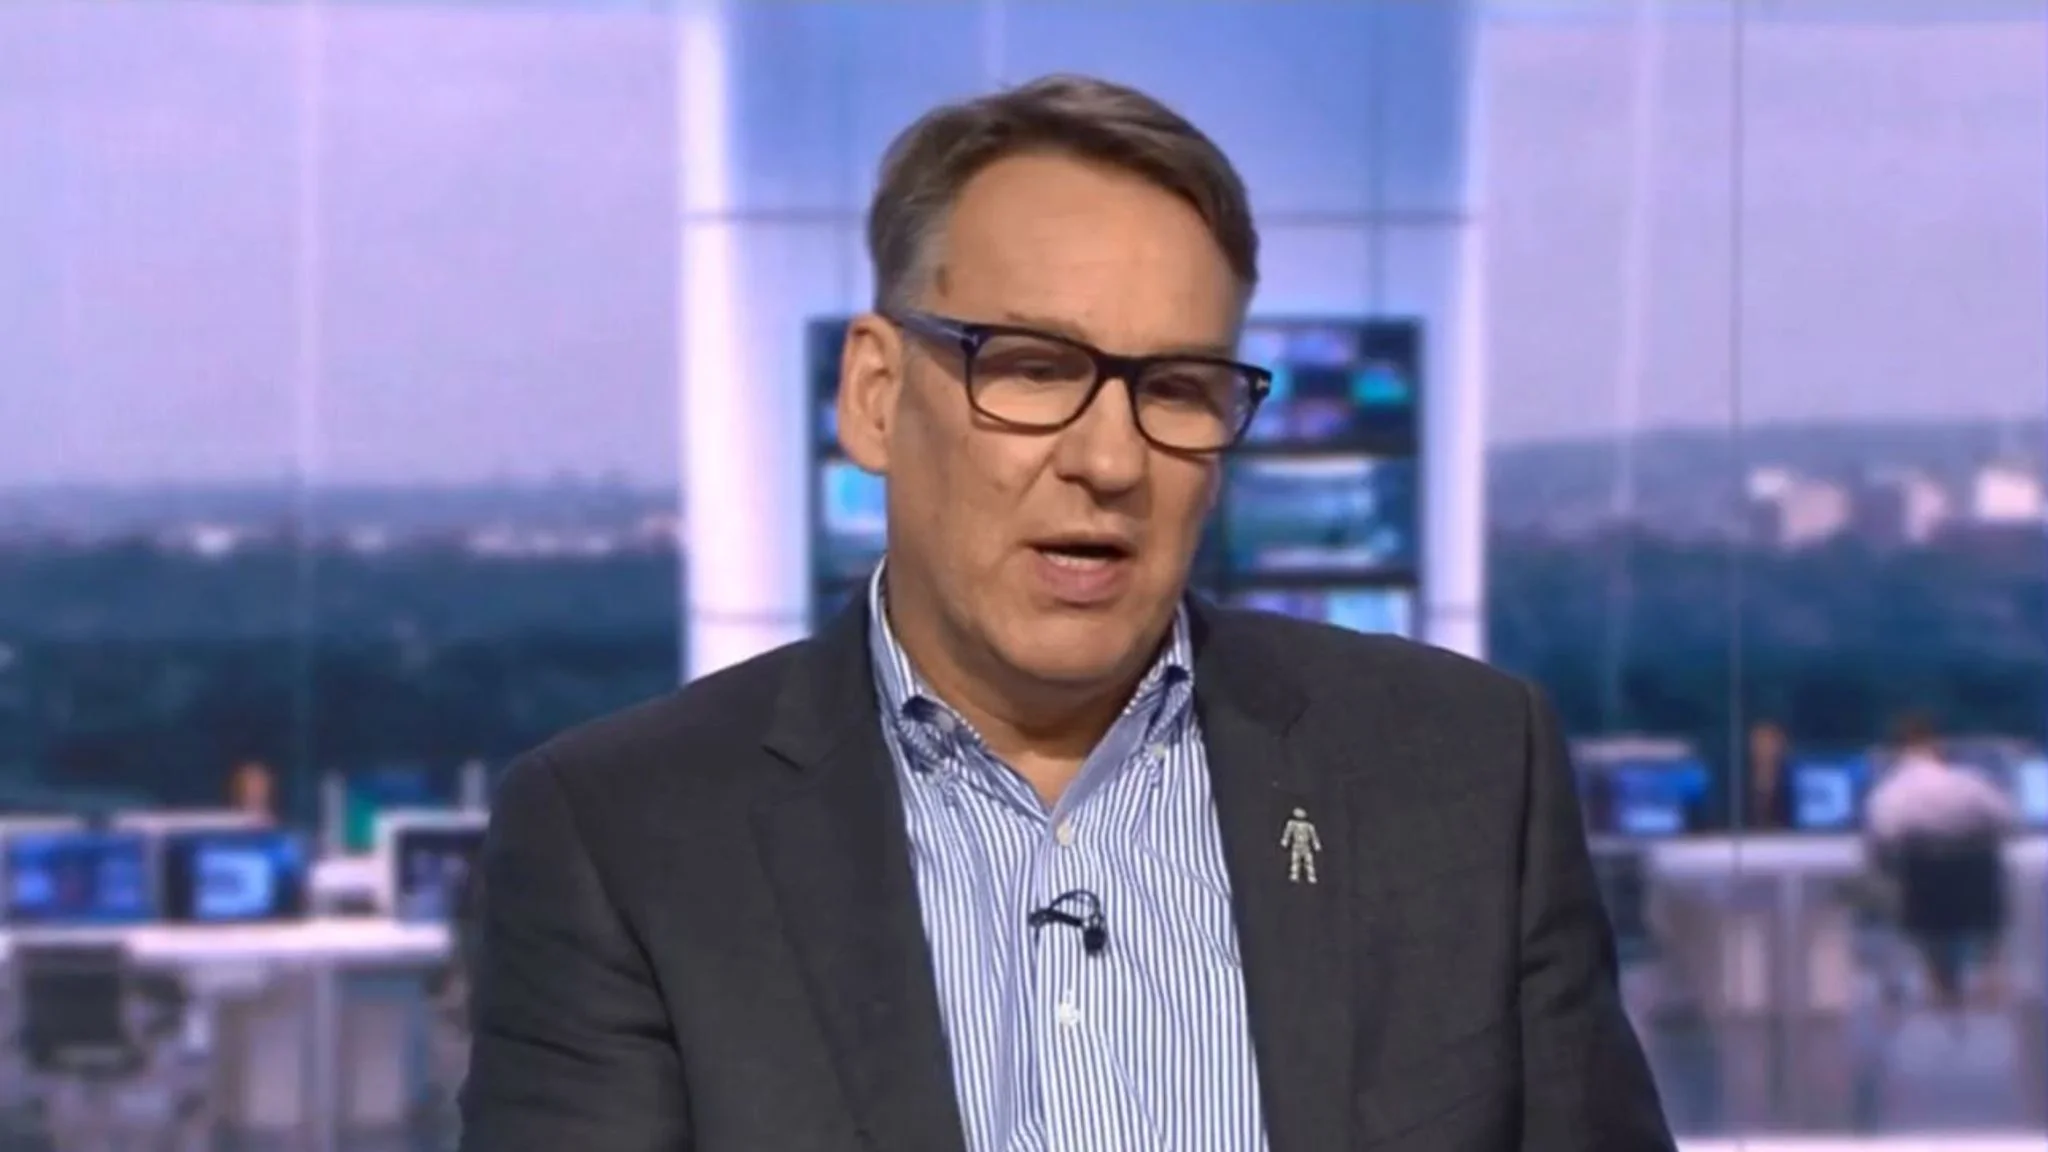 EPL: Merson predicts Chelsea vs Man City, Arsenal, Liverpool, United, other fixtures